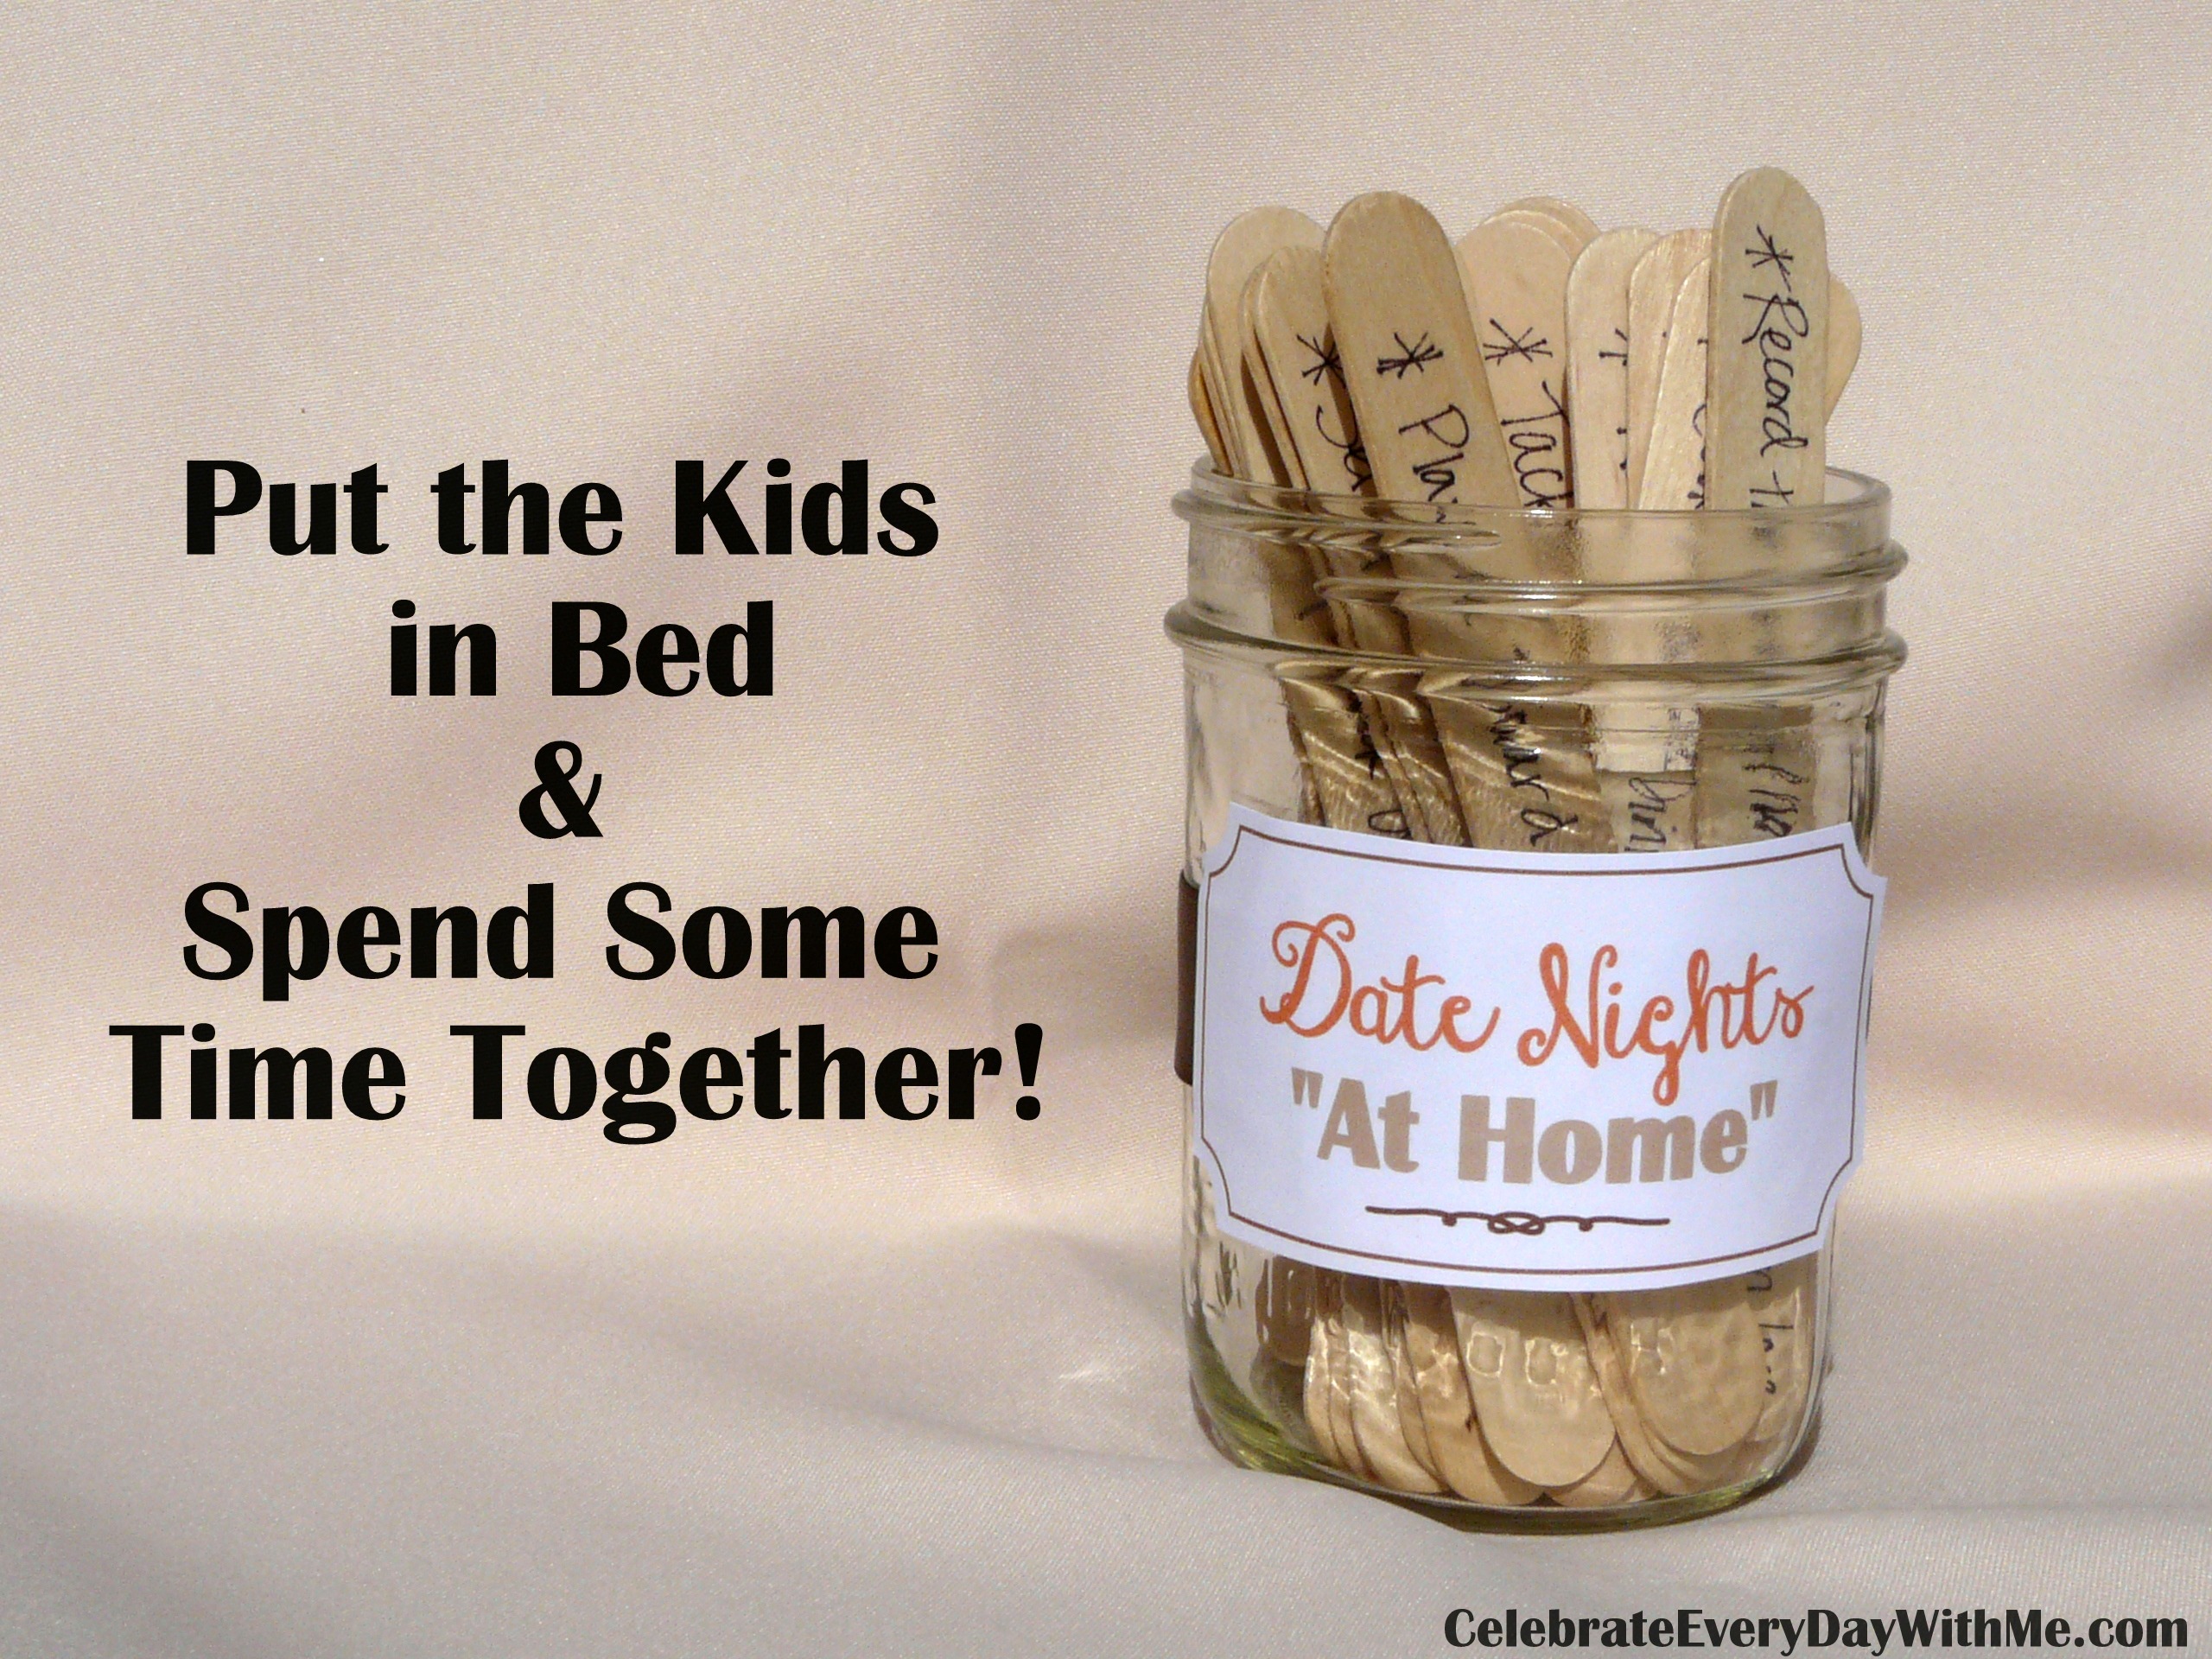 30 Ideas for Date Nights "At Home" - Celebrate Every Day With Me